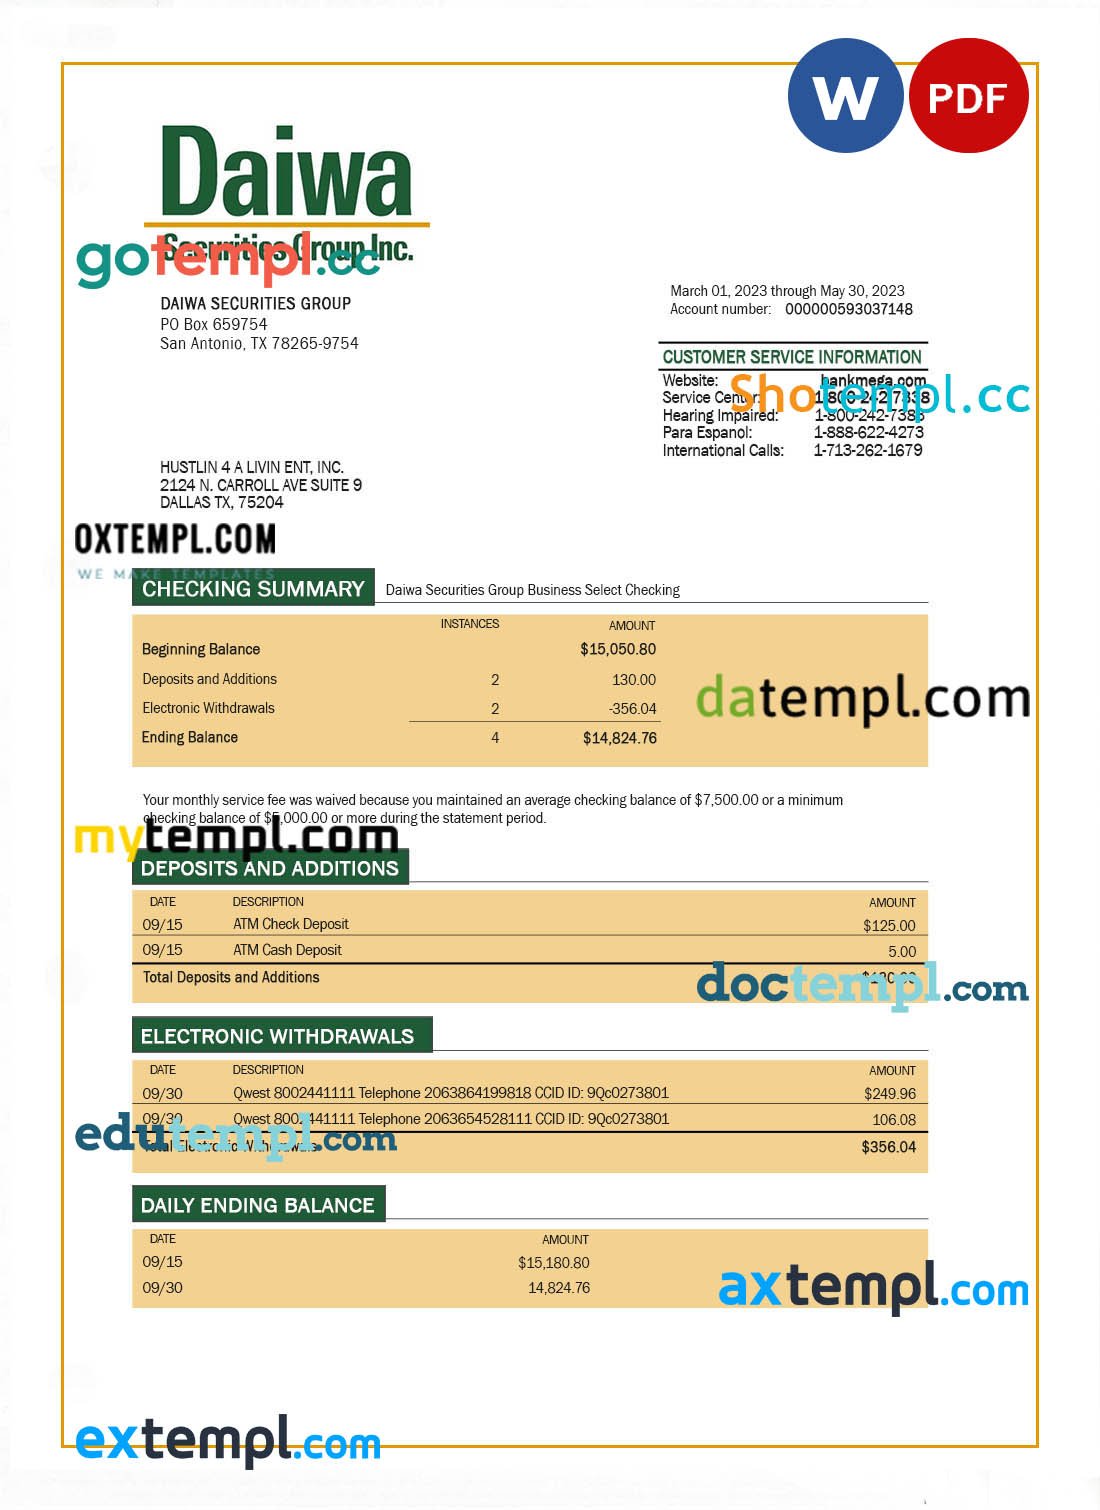 Sample IT Company Invoice template in word and pdf format